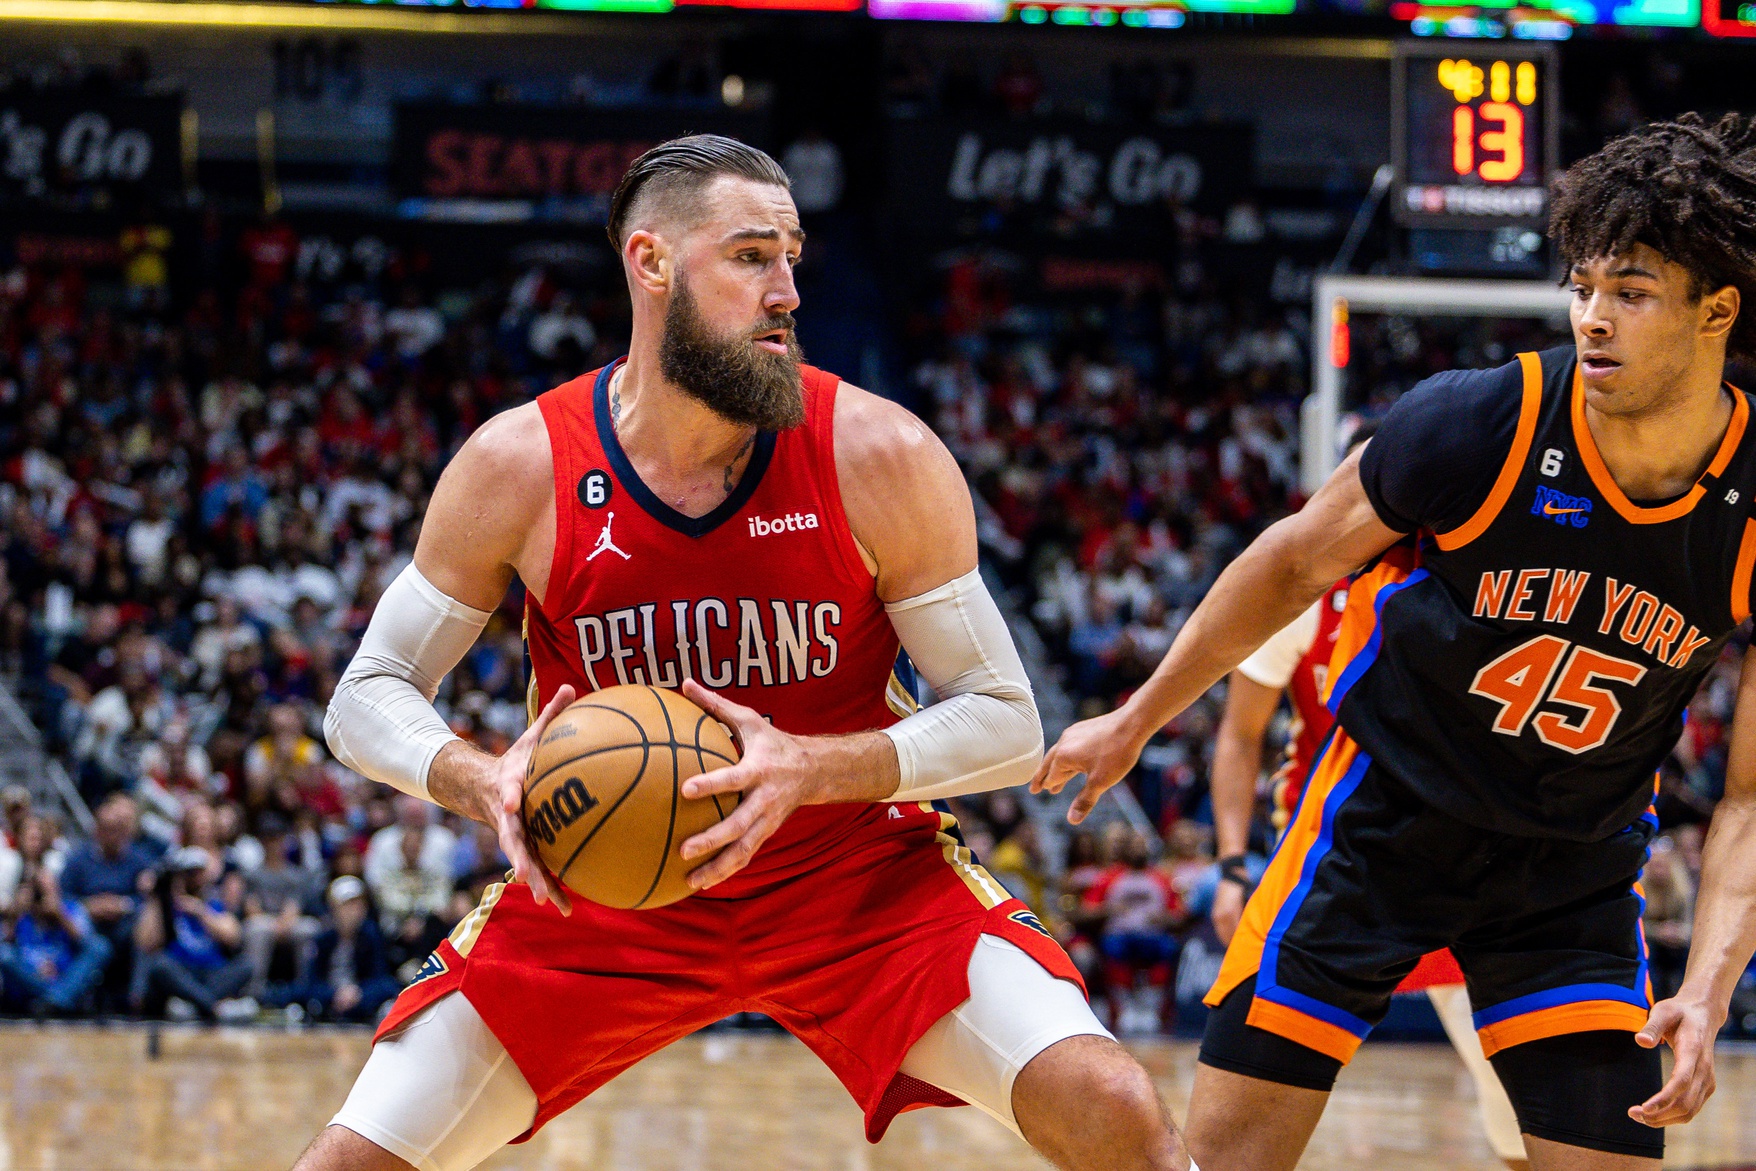 The Pelicans are reportedly trying to trade up into the top 3 for